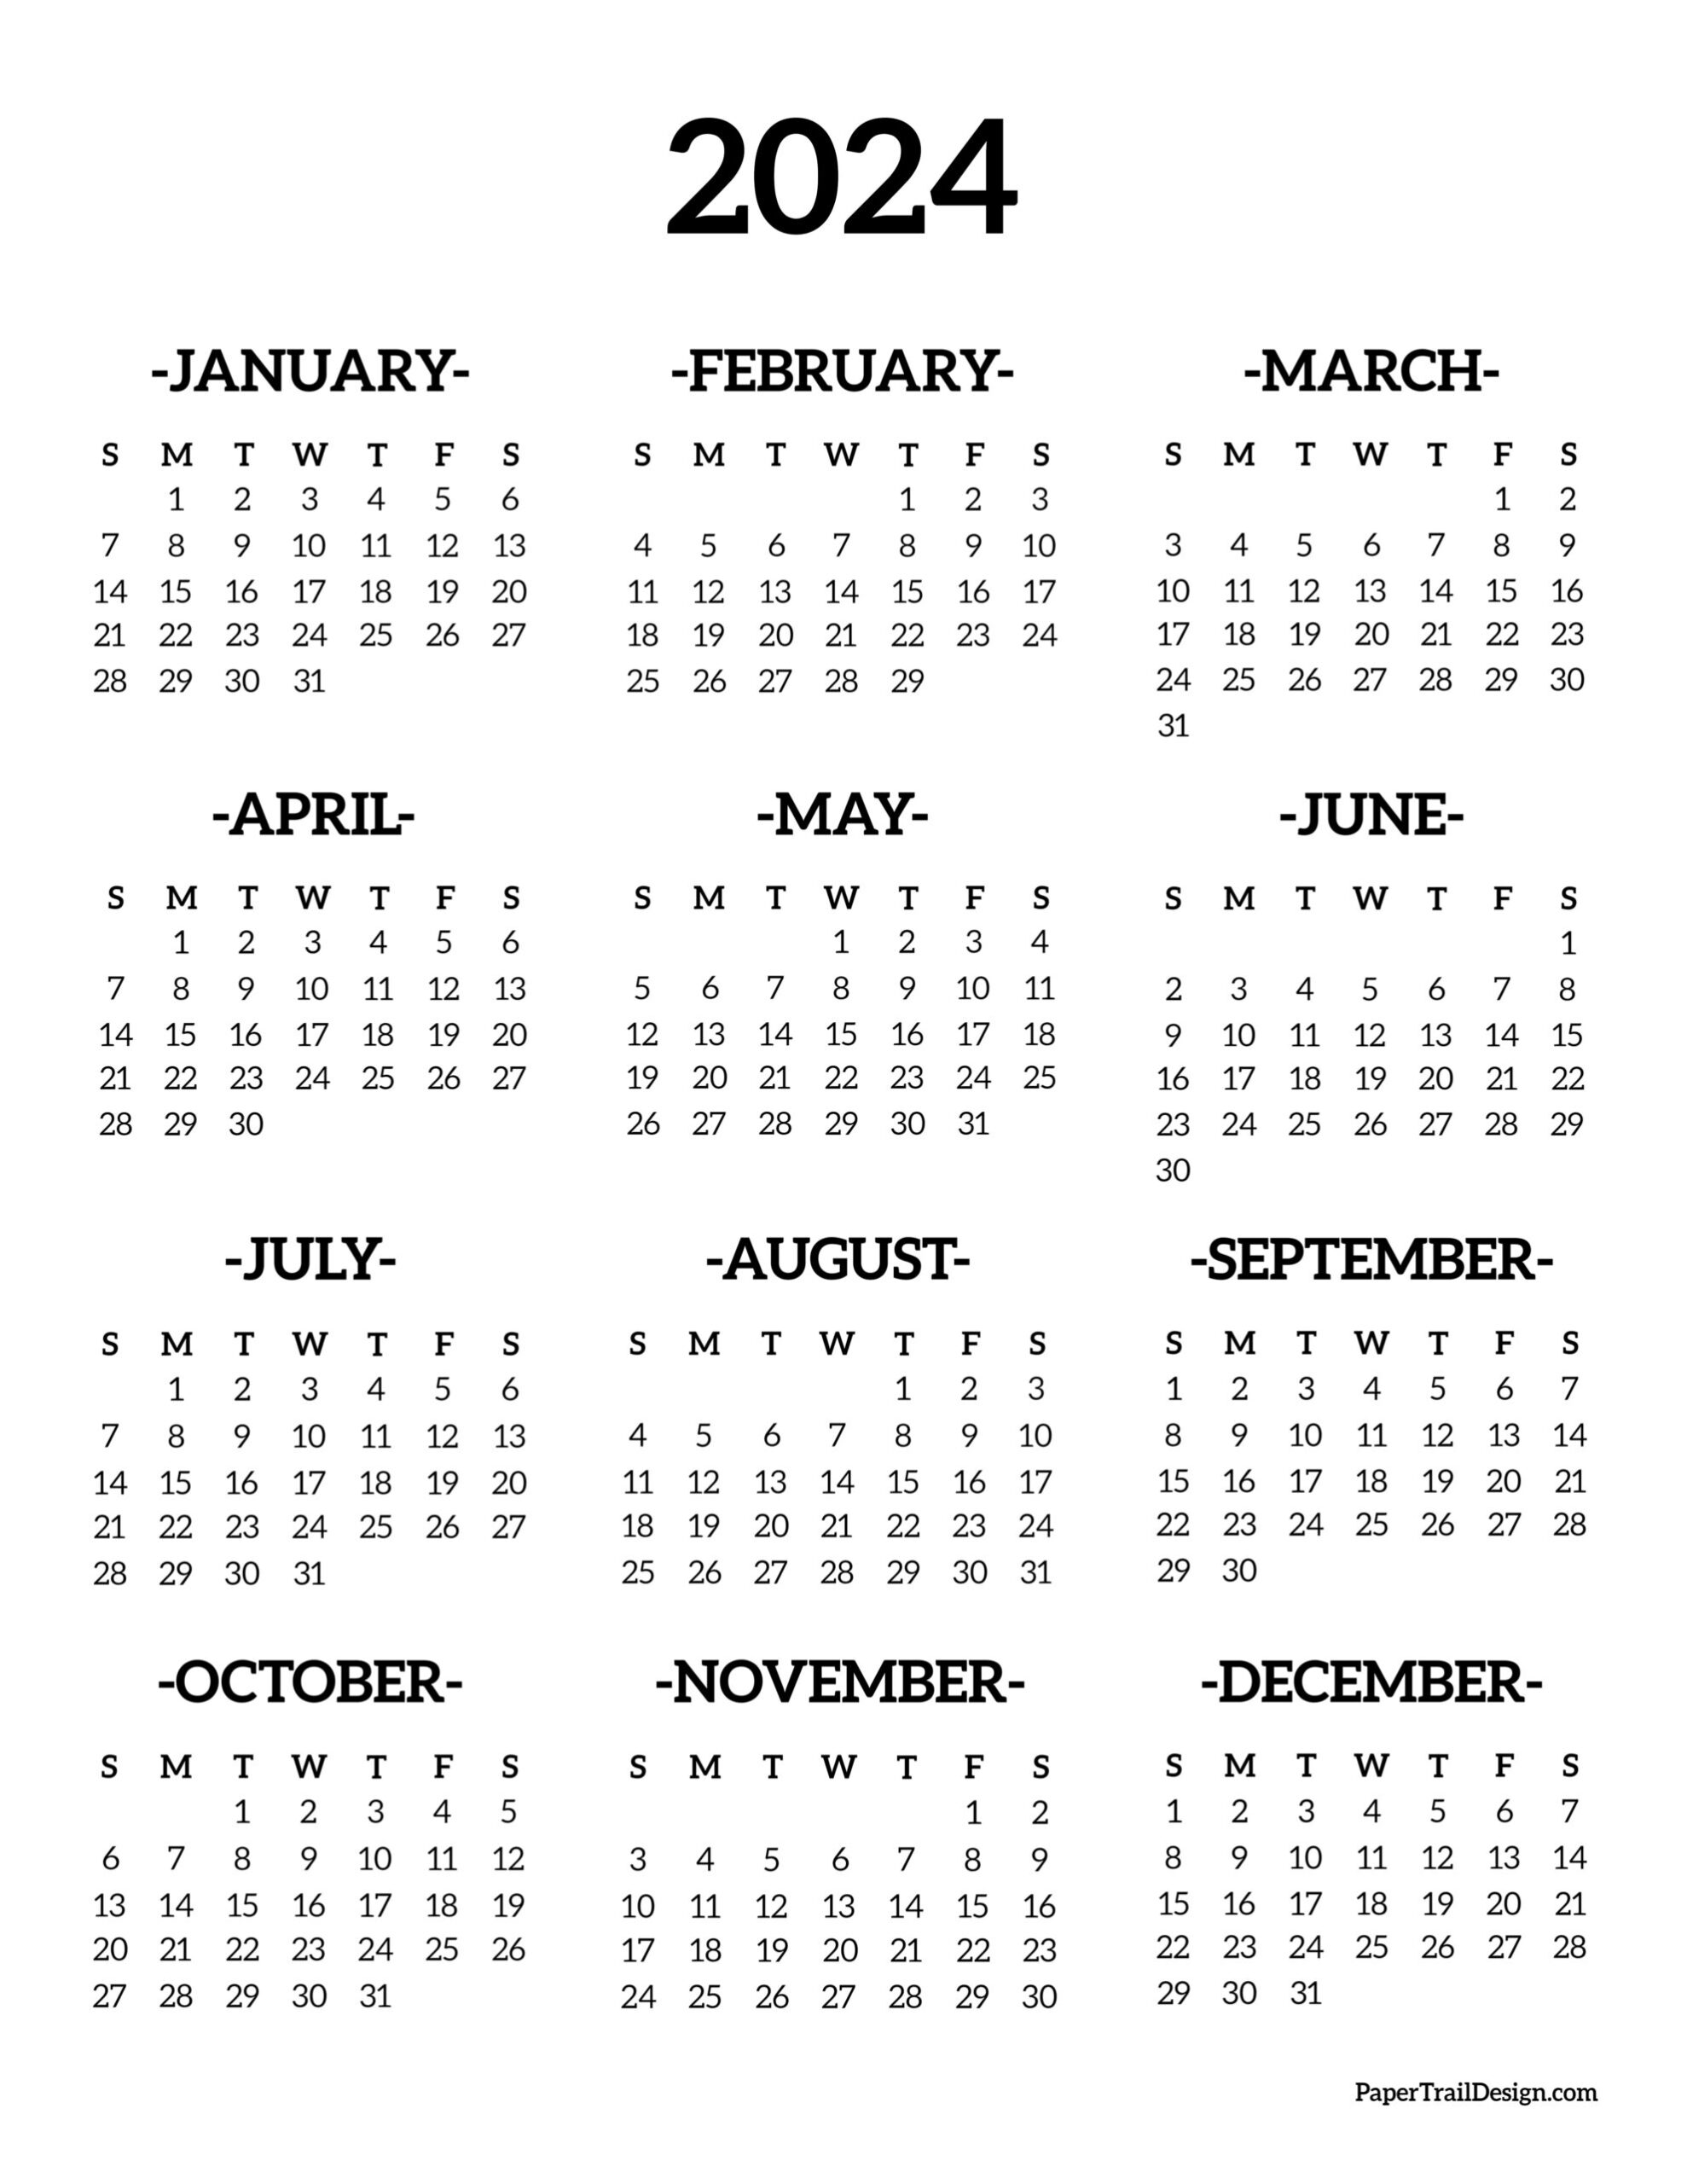 Calendar 2024 Printable One Page - Paper Trail Design for Free 2024 Yearly Calendar Printable One Page